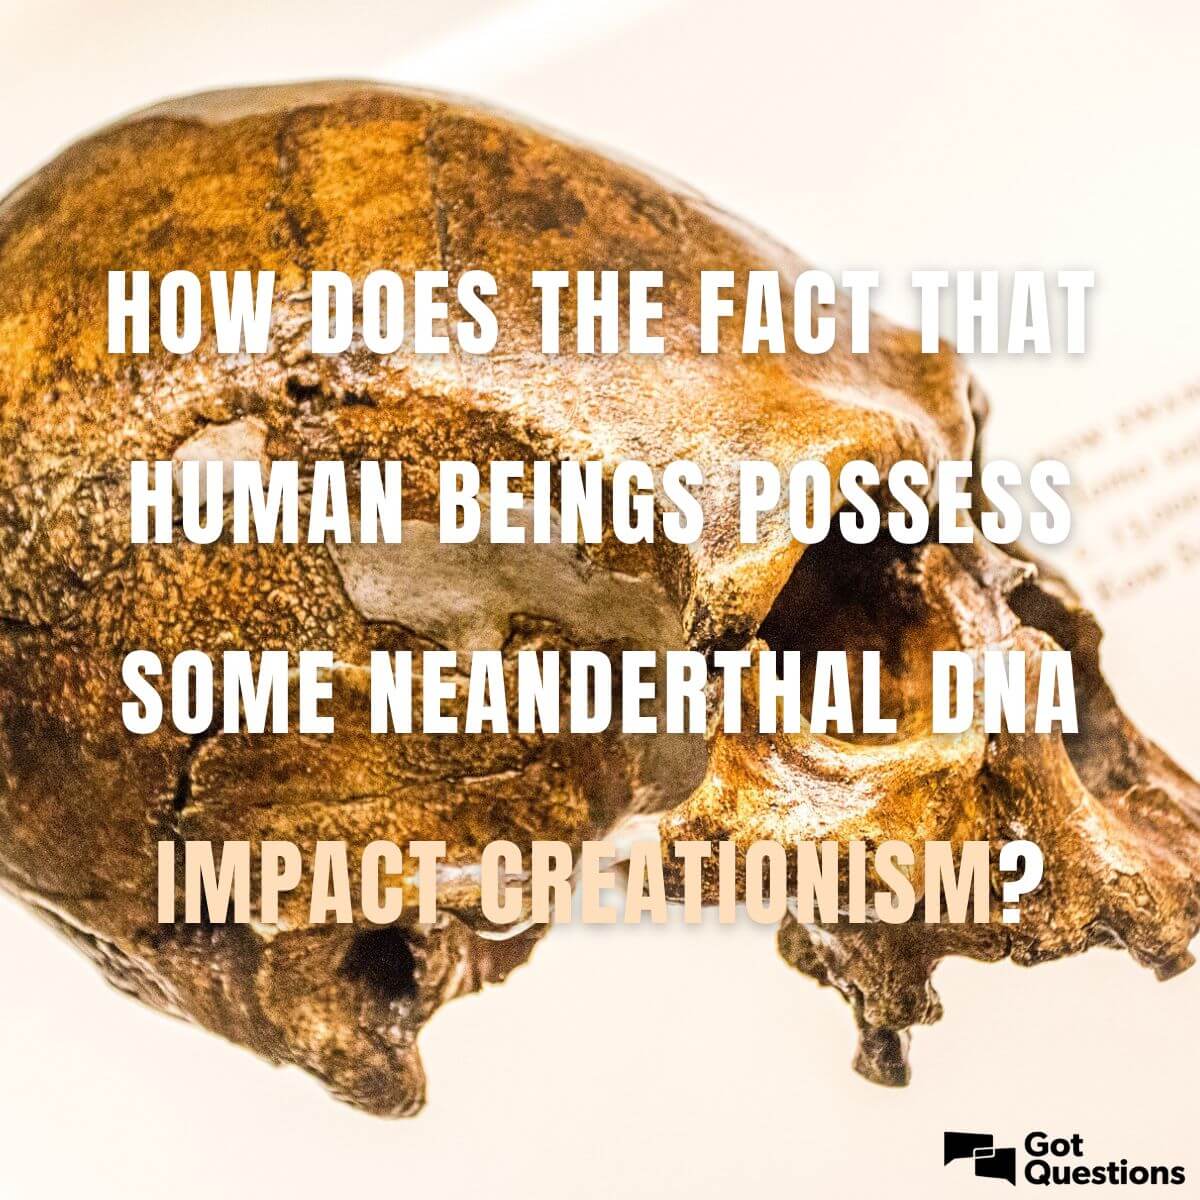 How does the fact that human beings possess some Neanderthal DNA impact